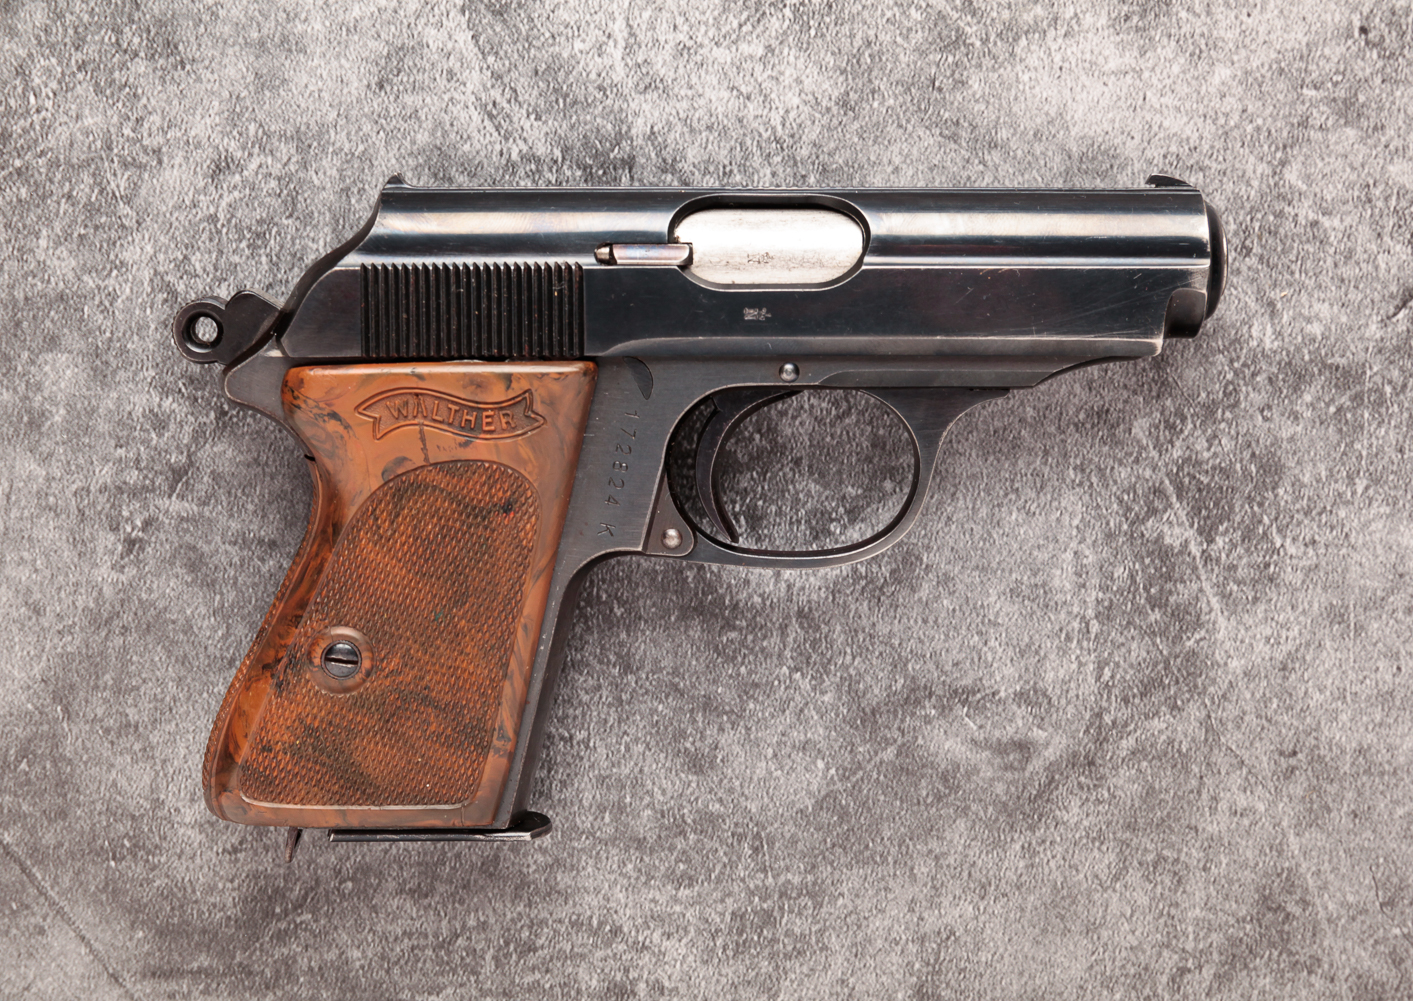 WALTHER PPK 7.65MM SEMI AUTOMATIC